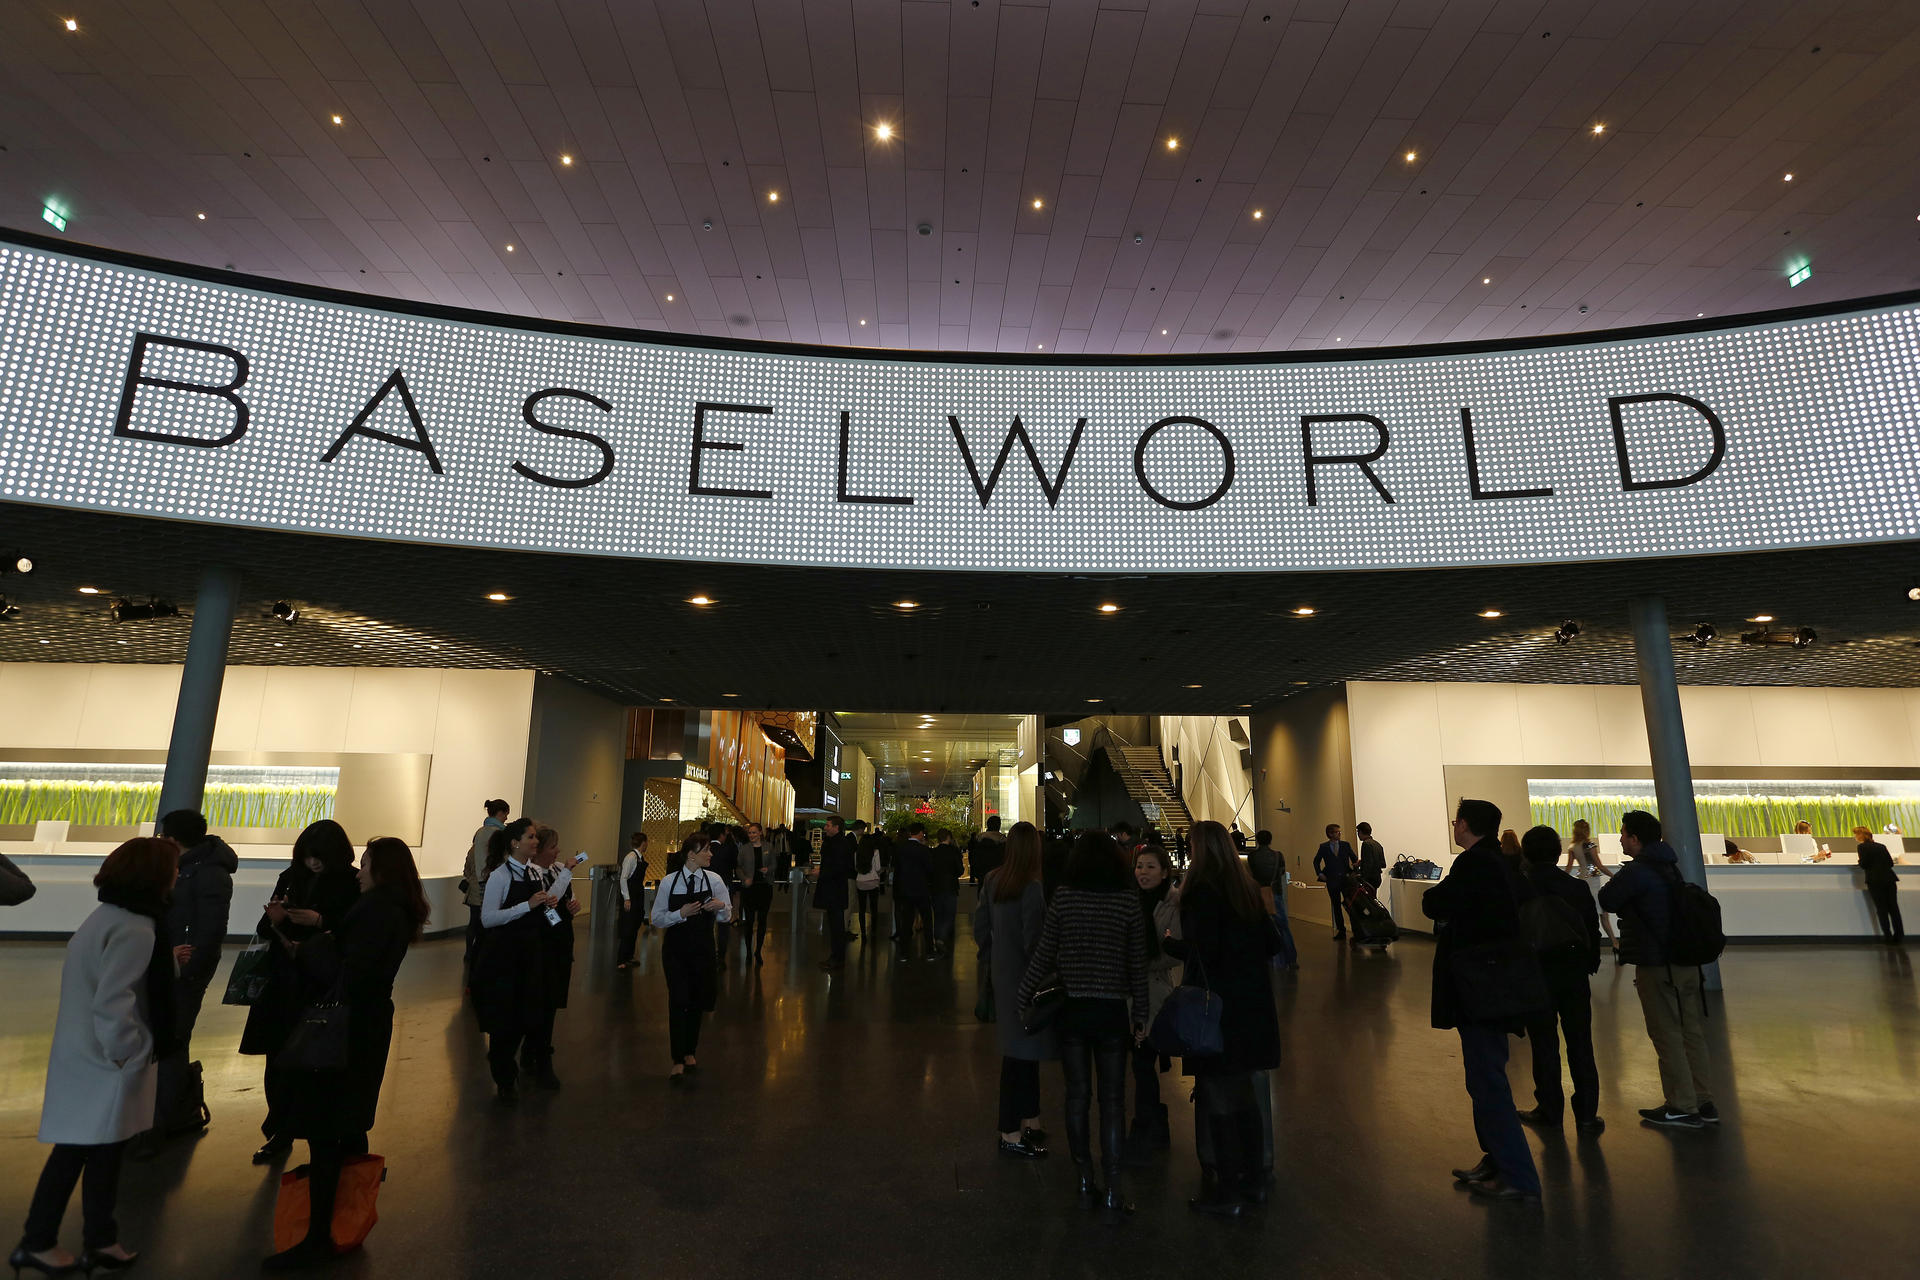 More than 1,400 companies displayed their latest innovations at the BaselWorld fair, one of the two major watch fairs held earlier this year. Photo: Bloomberg